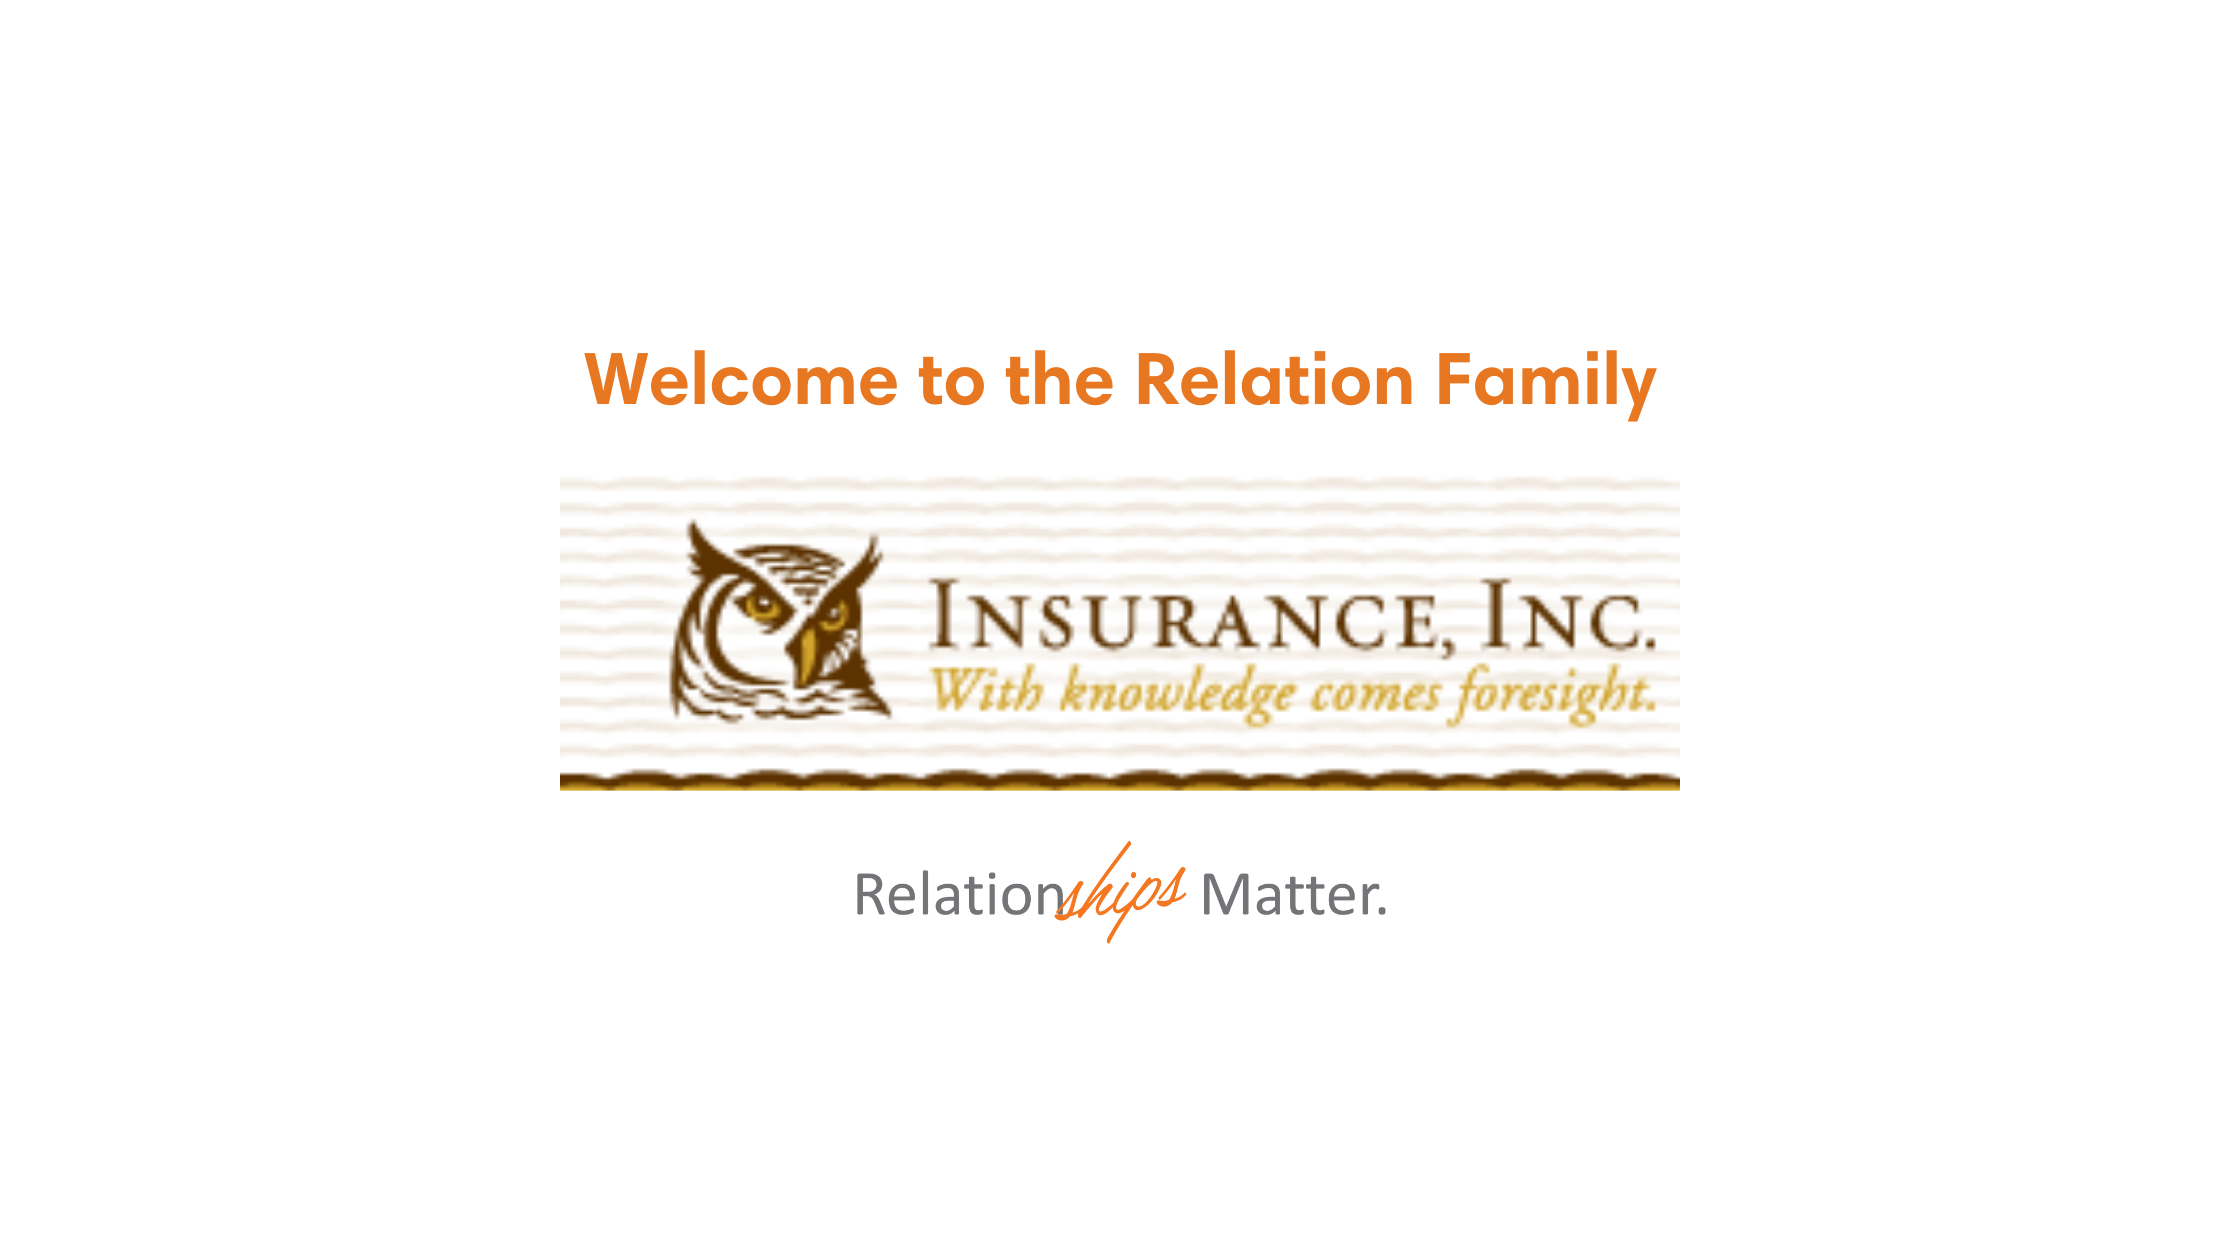 Relation Insurance Services Acquires the Assets of Insurance, Inc.